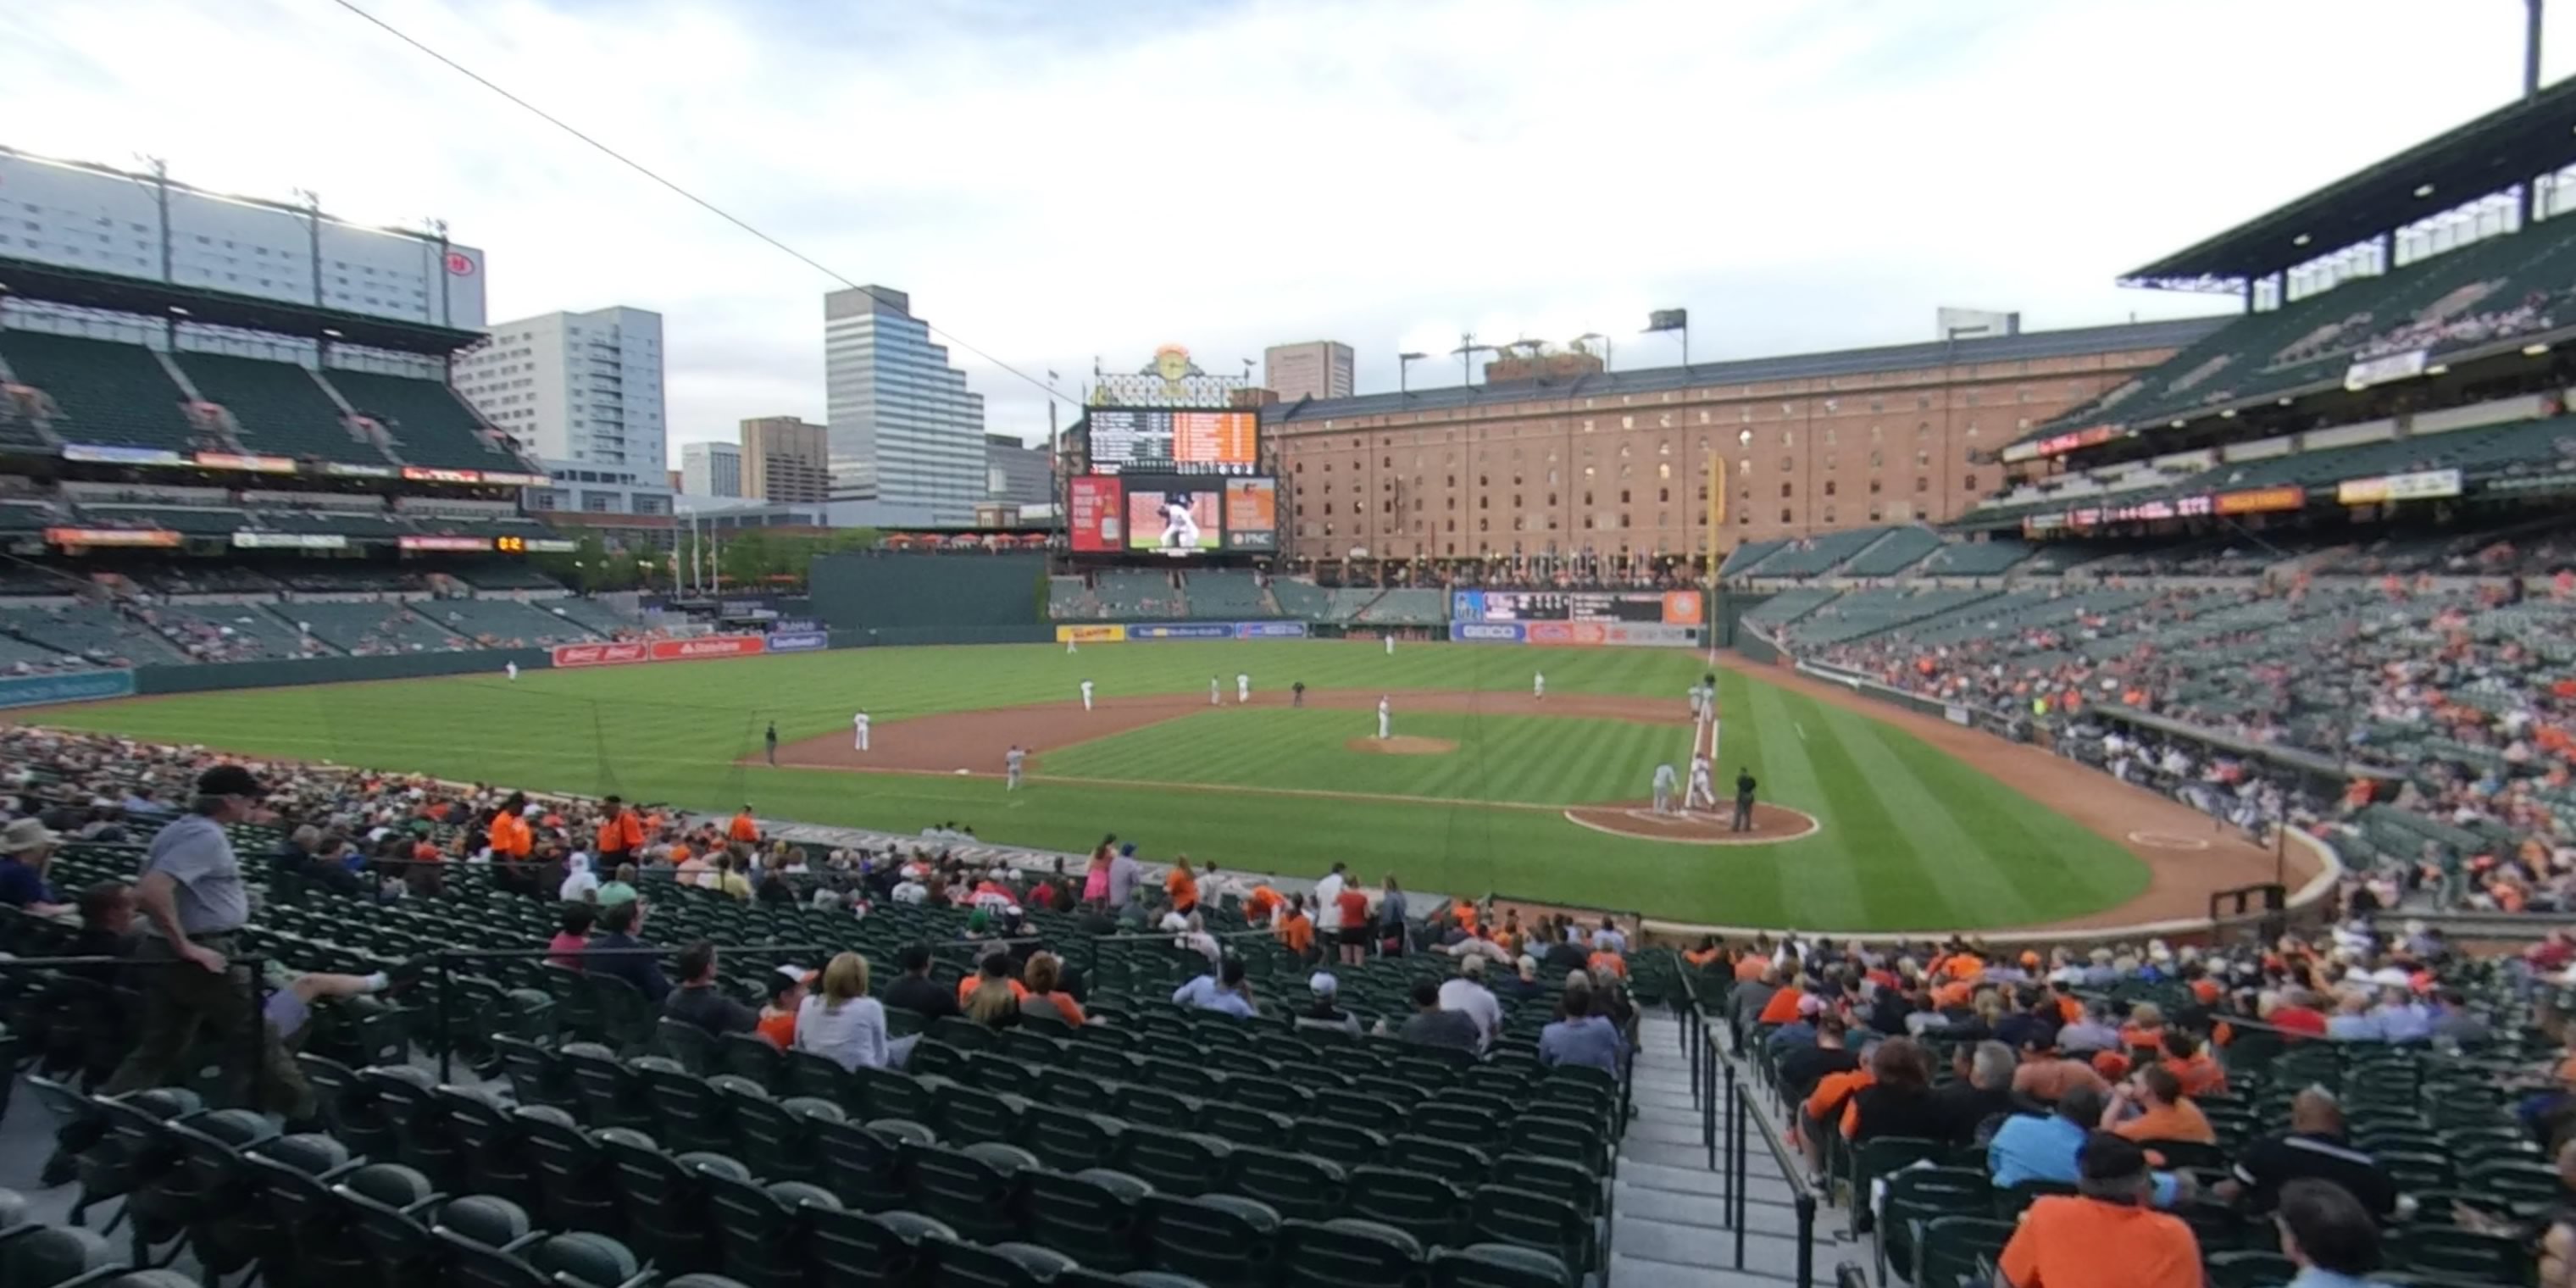 section 44 panoramic seat view  - oriole park